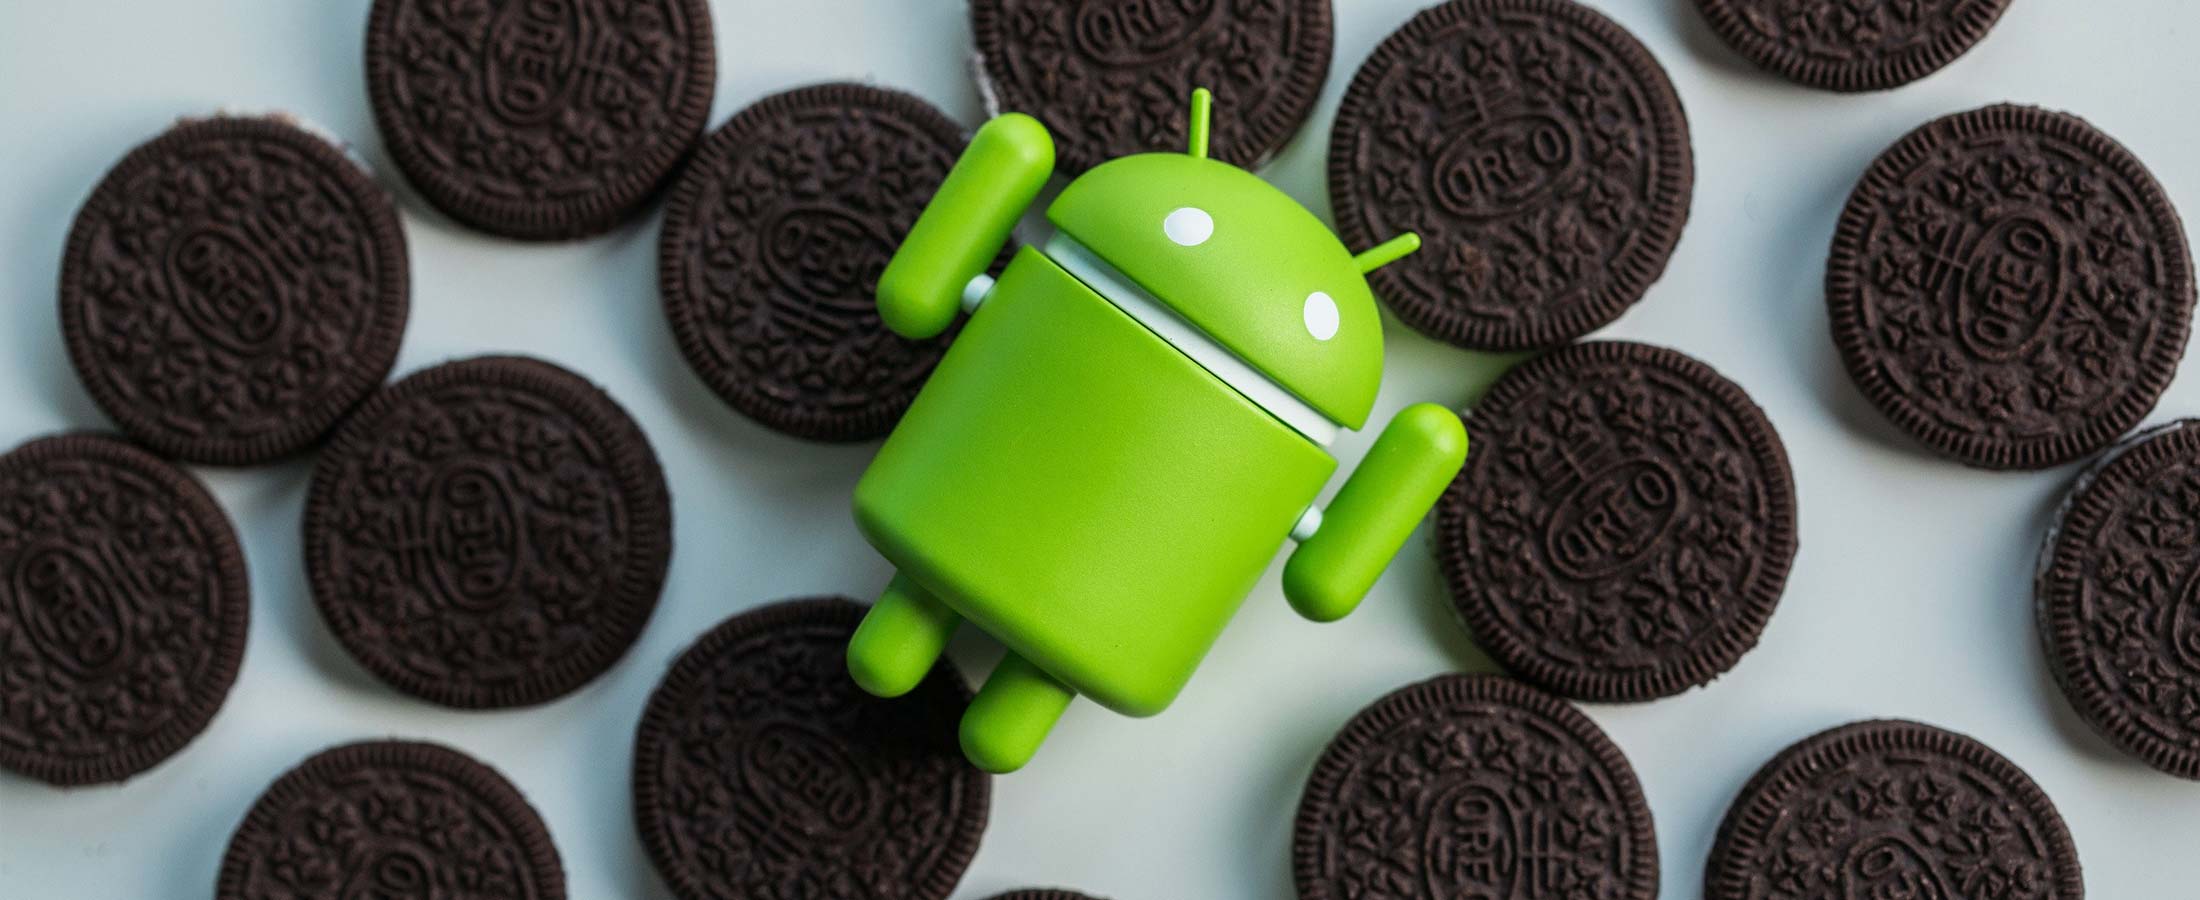 Android Oreo: Developer features, usage analysis, and superhero metaphors